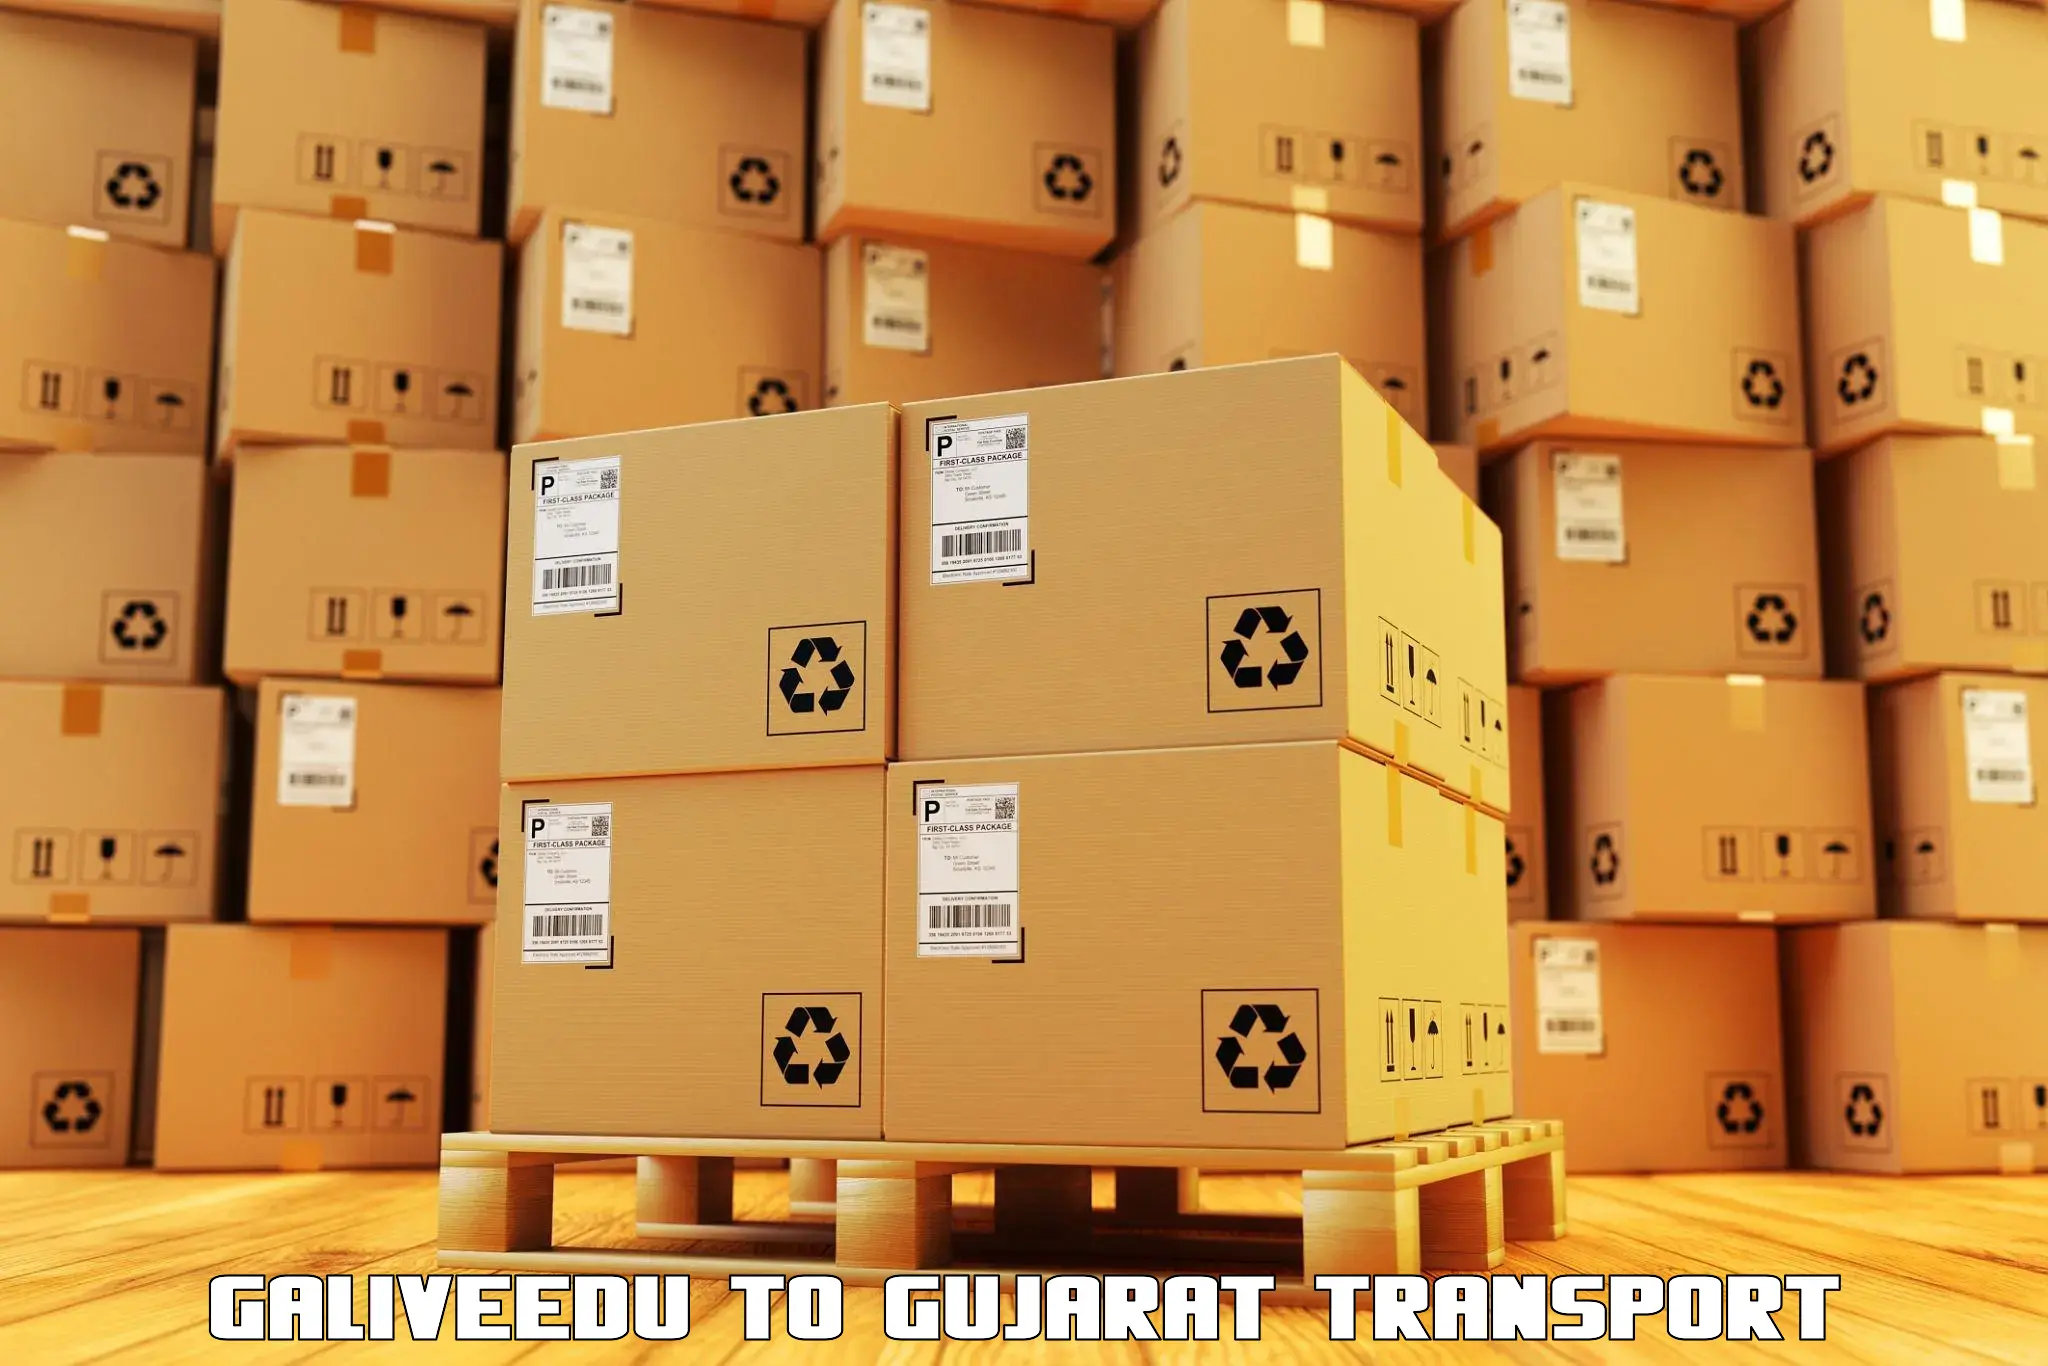 Truck transport companies in India Galiveedu to Songadh